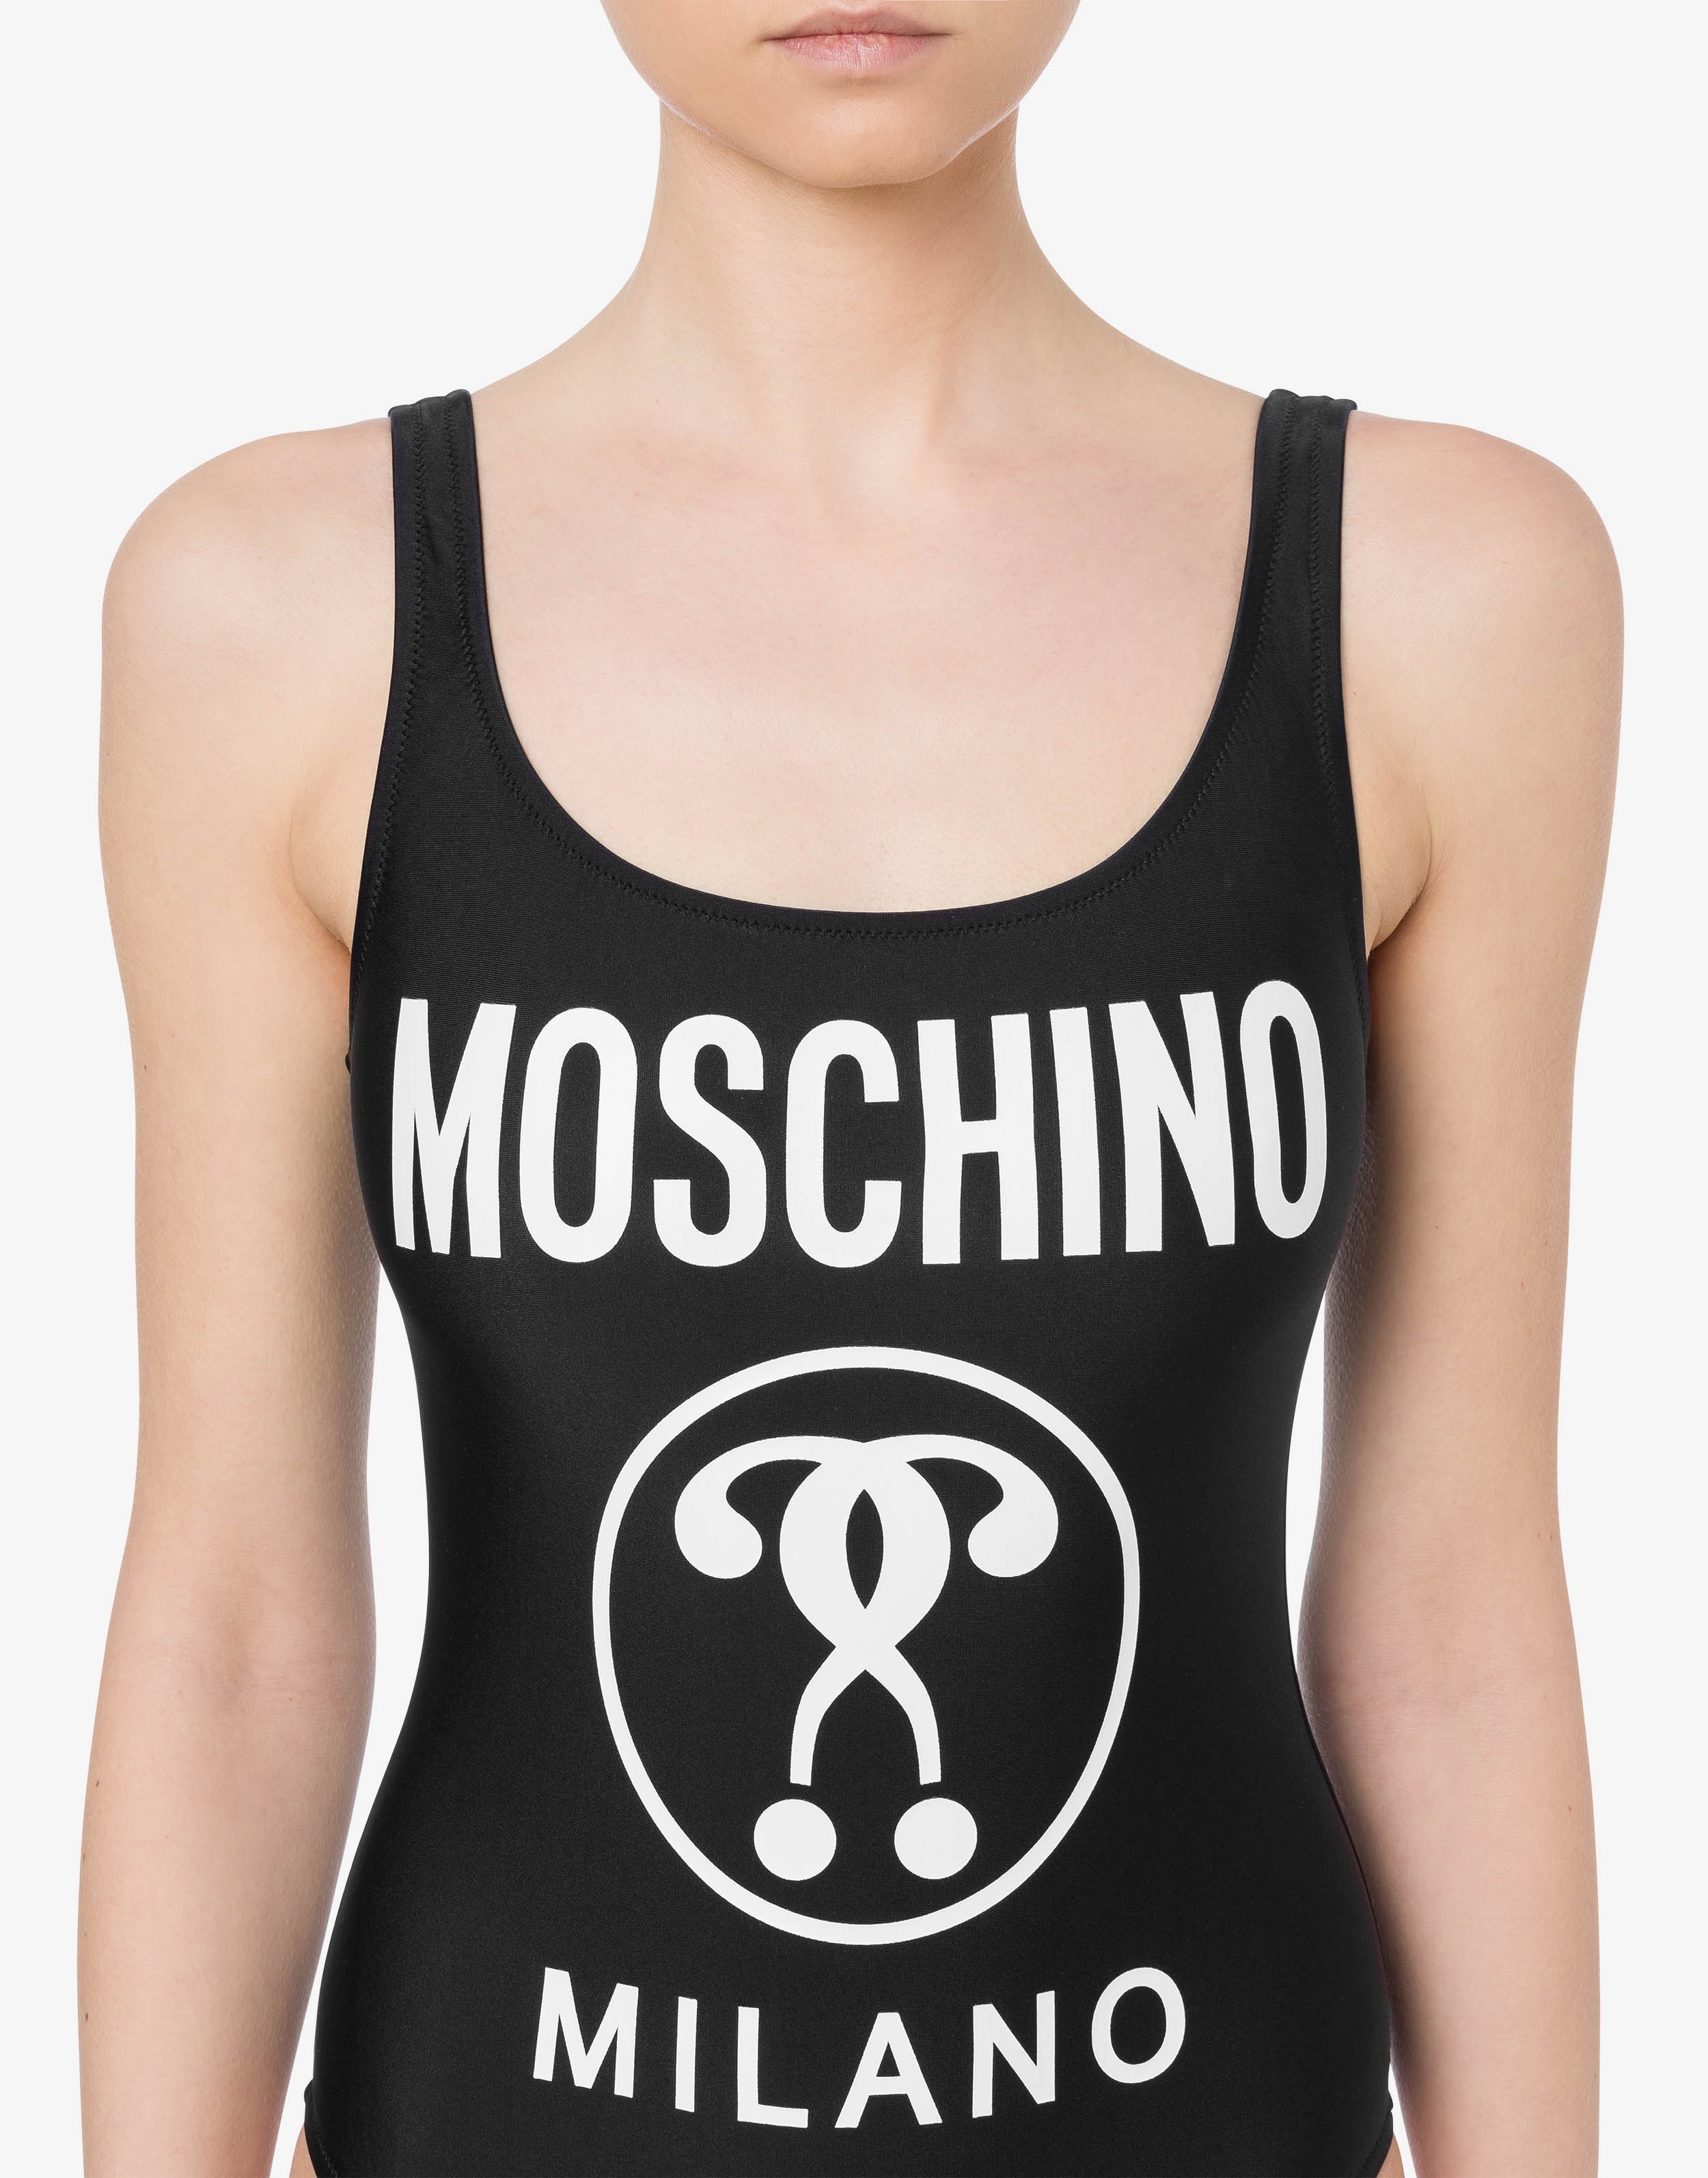 Moschino DOUBLE QUESTION MARK FLEECE ONE-PIECE SWIMSUIT | REVERSIBLE